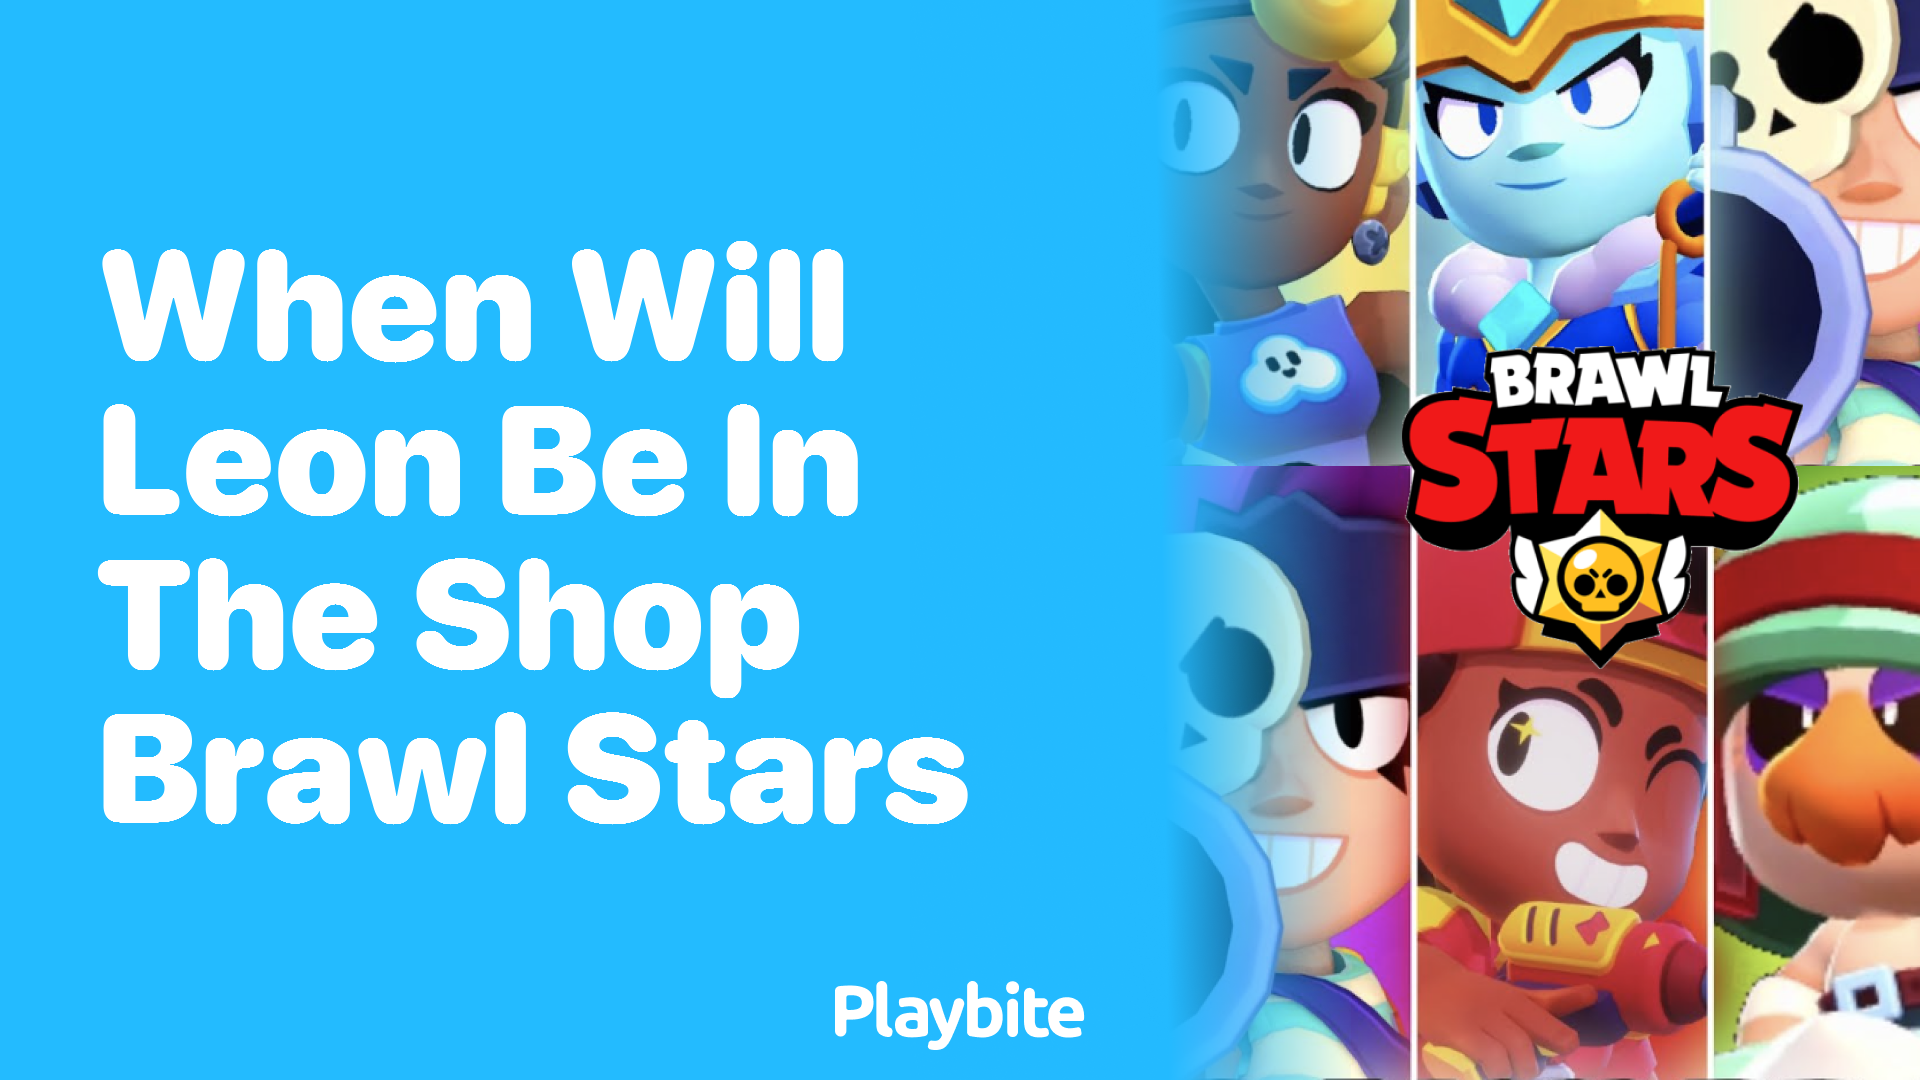 When Will Leon Be in the Shop in Brawl Stars? - Playbite